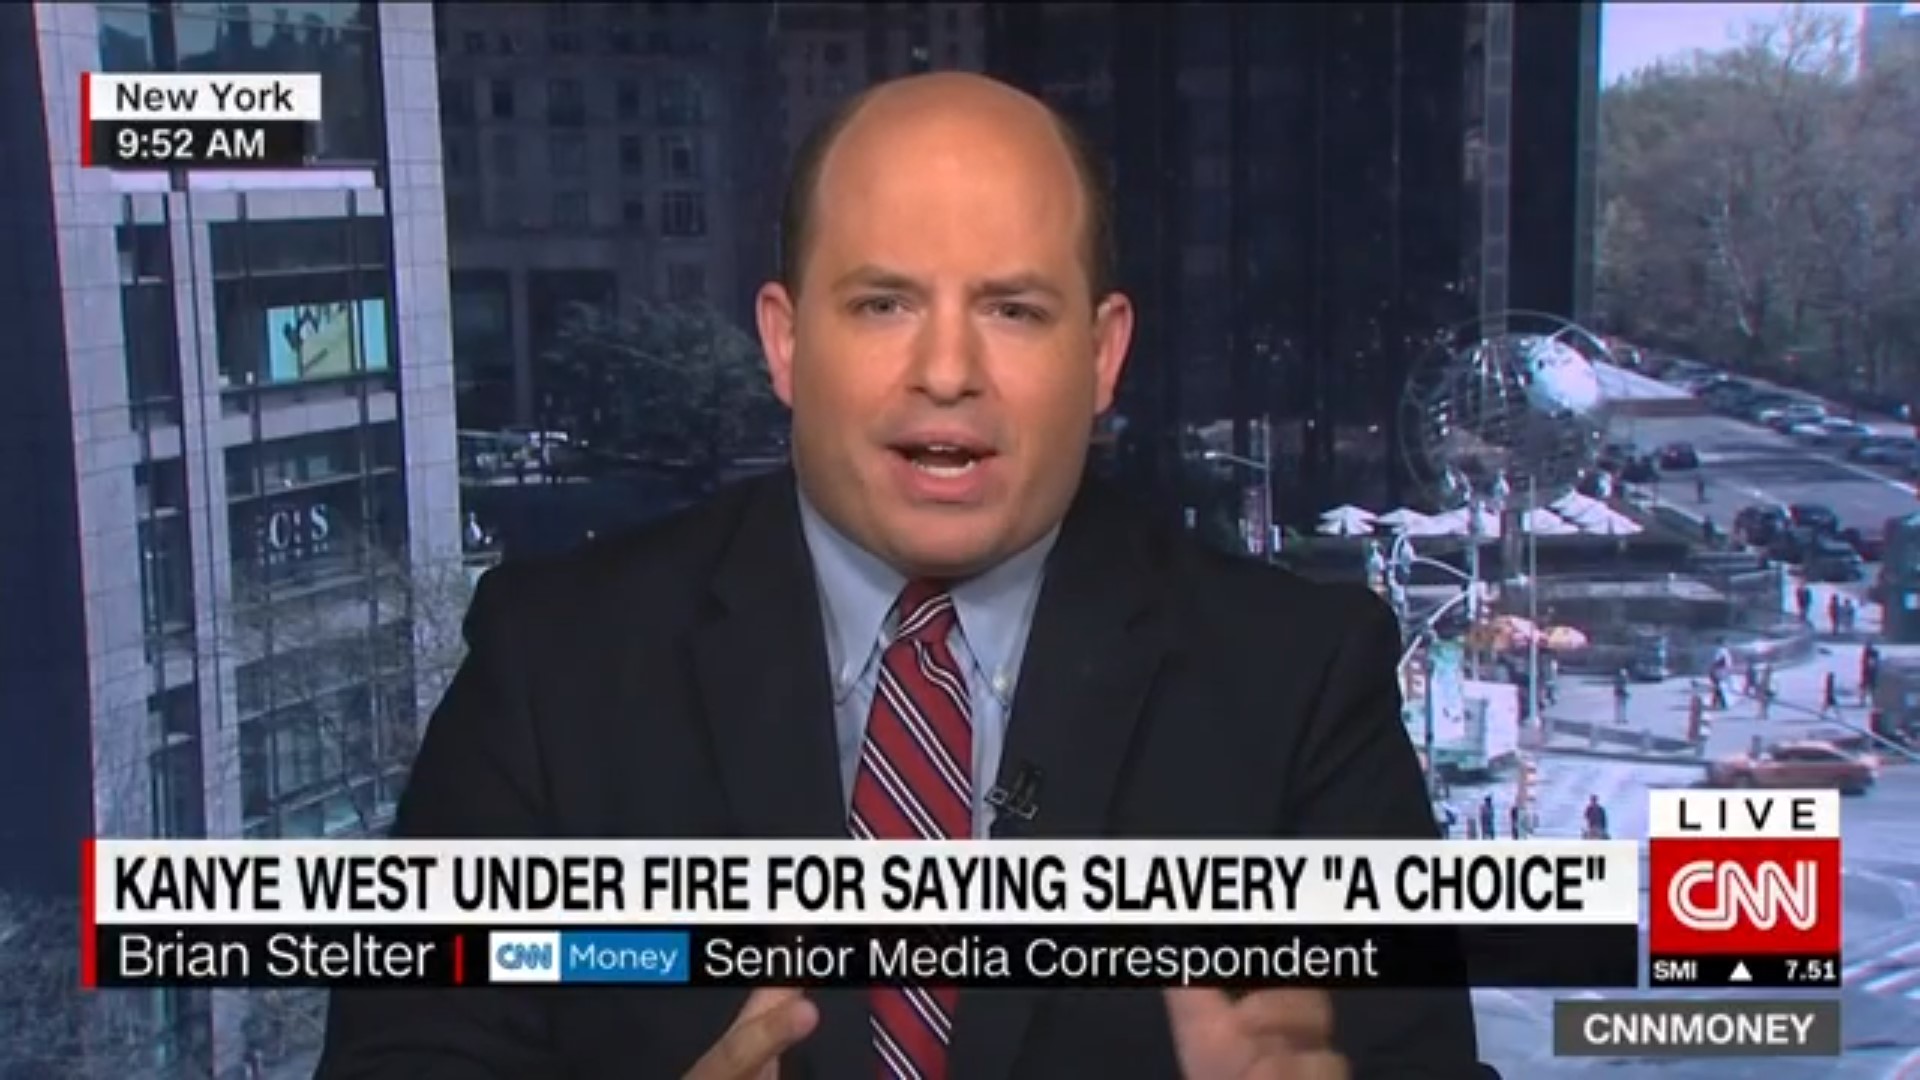 CNN’s Brian Stelter: Kanye’s Rants A ‘Gift To Racists’ And Stuff ‘Usually Promoted By White Nationalists’